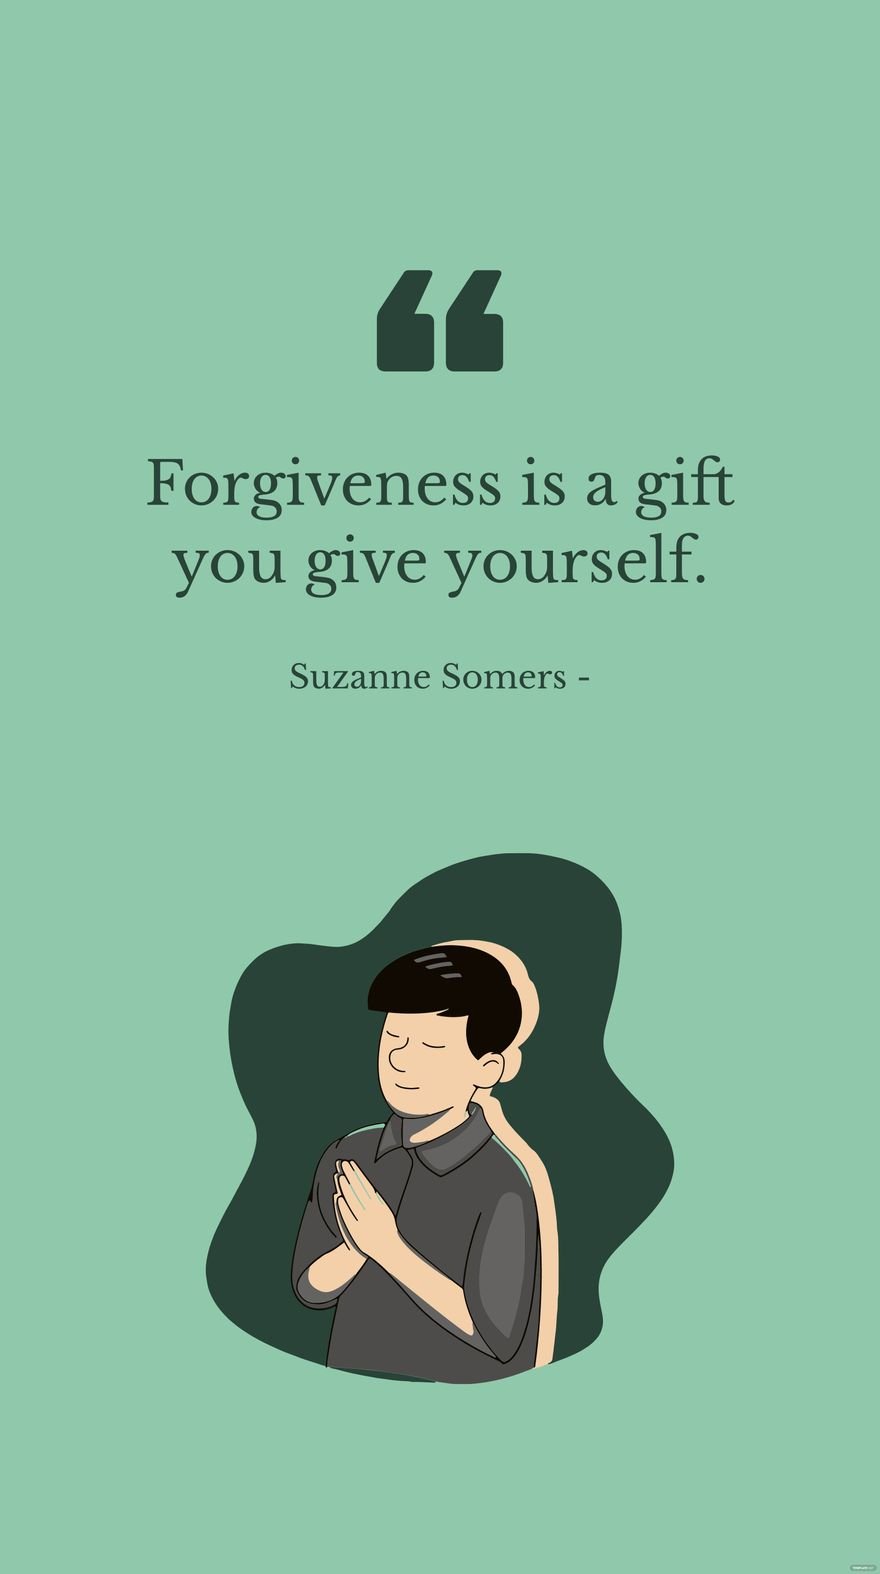 Suzanne Somers - Forgiveness is a gift you give yourself. in JPG